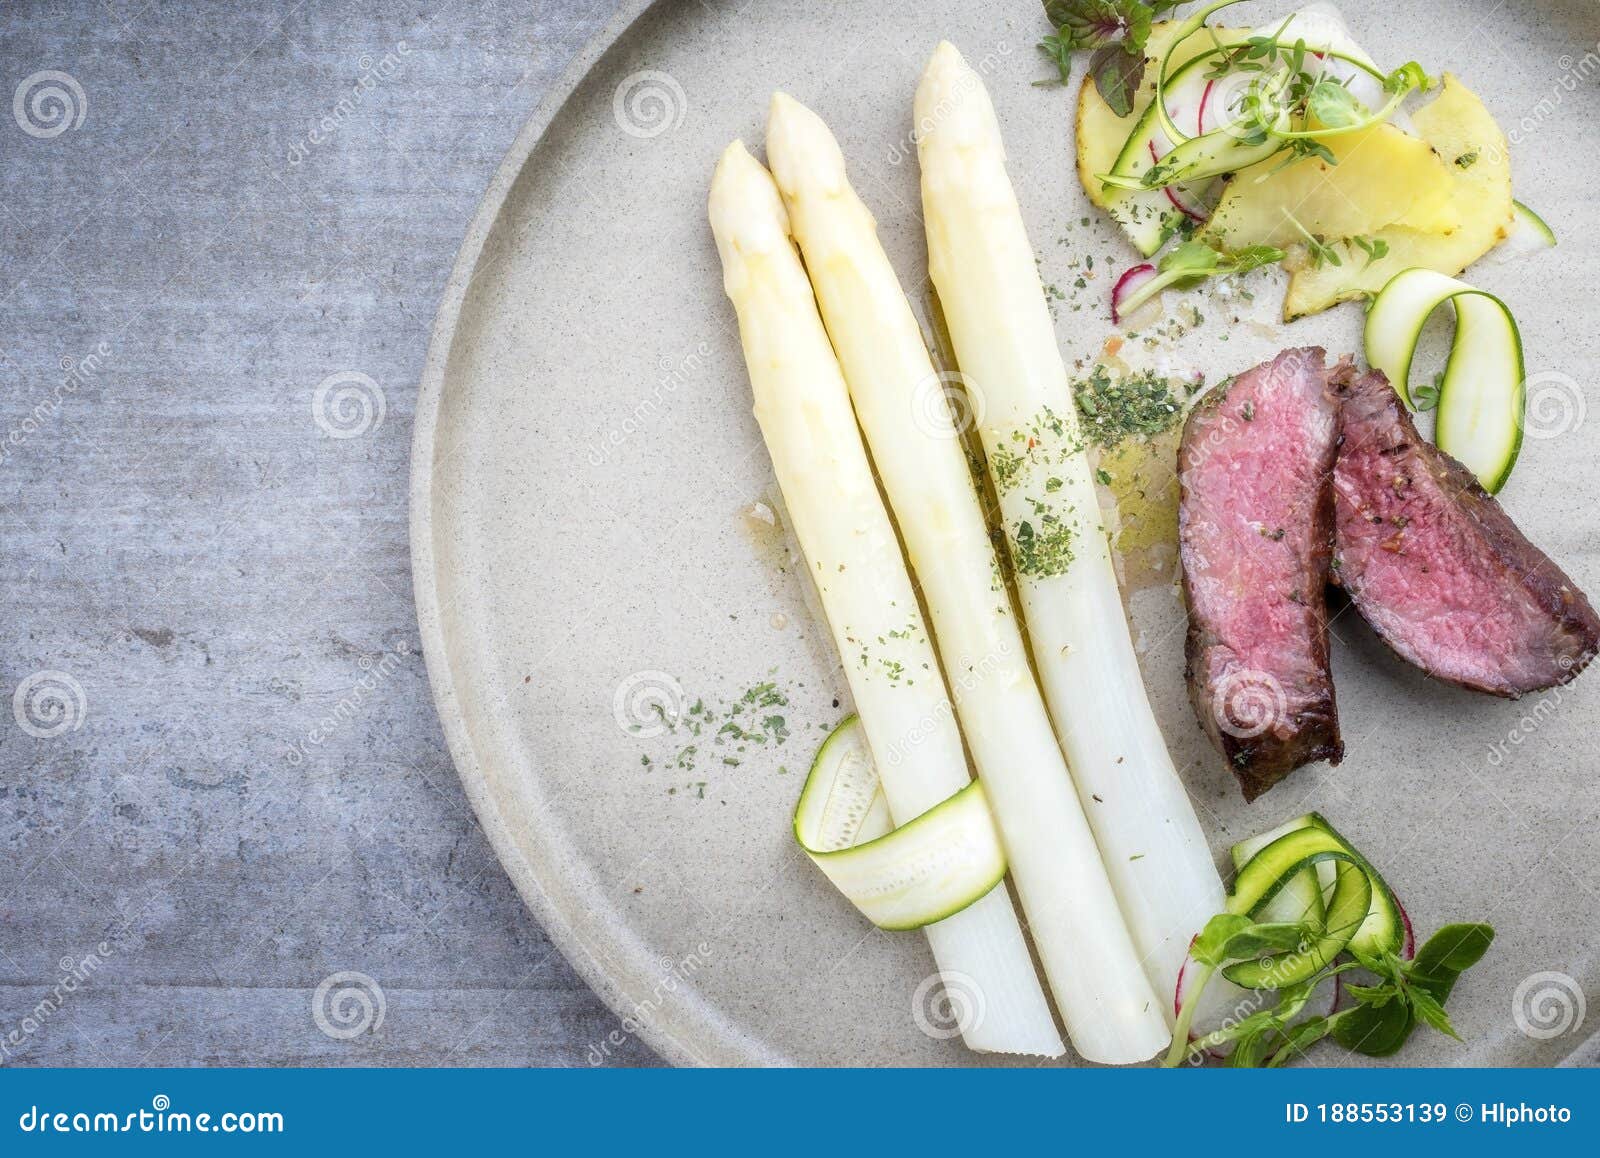 Traditional Barbecue Dry Aged Sliced Filet Steak with White Butter Sauce and Roast Stock Image - Image of barbecue, chateau: 188553139